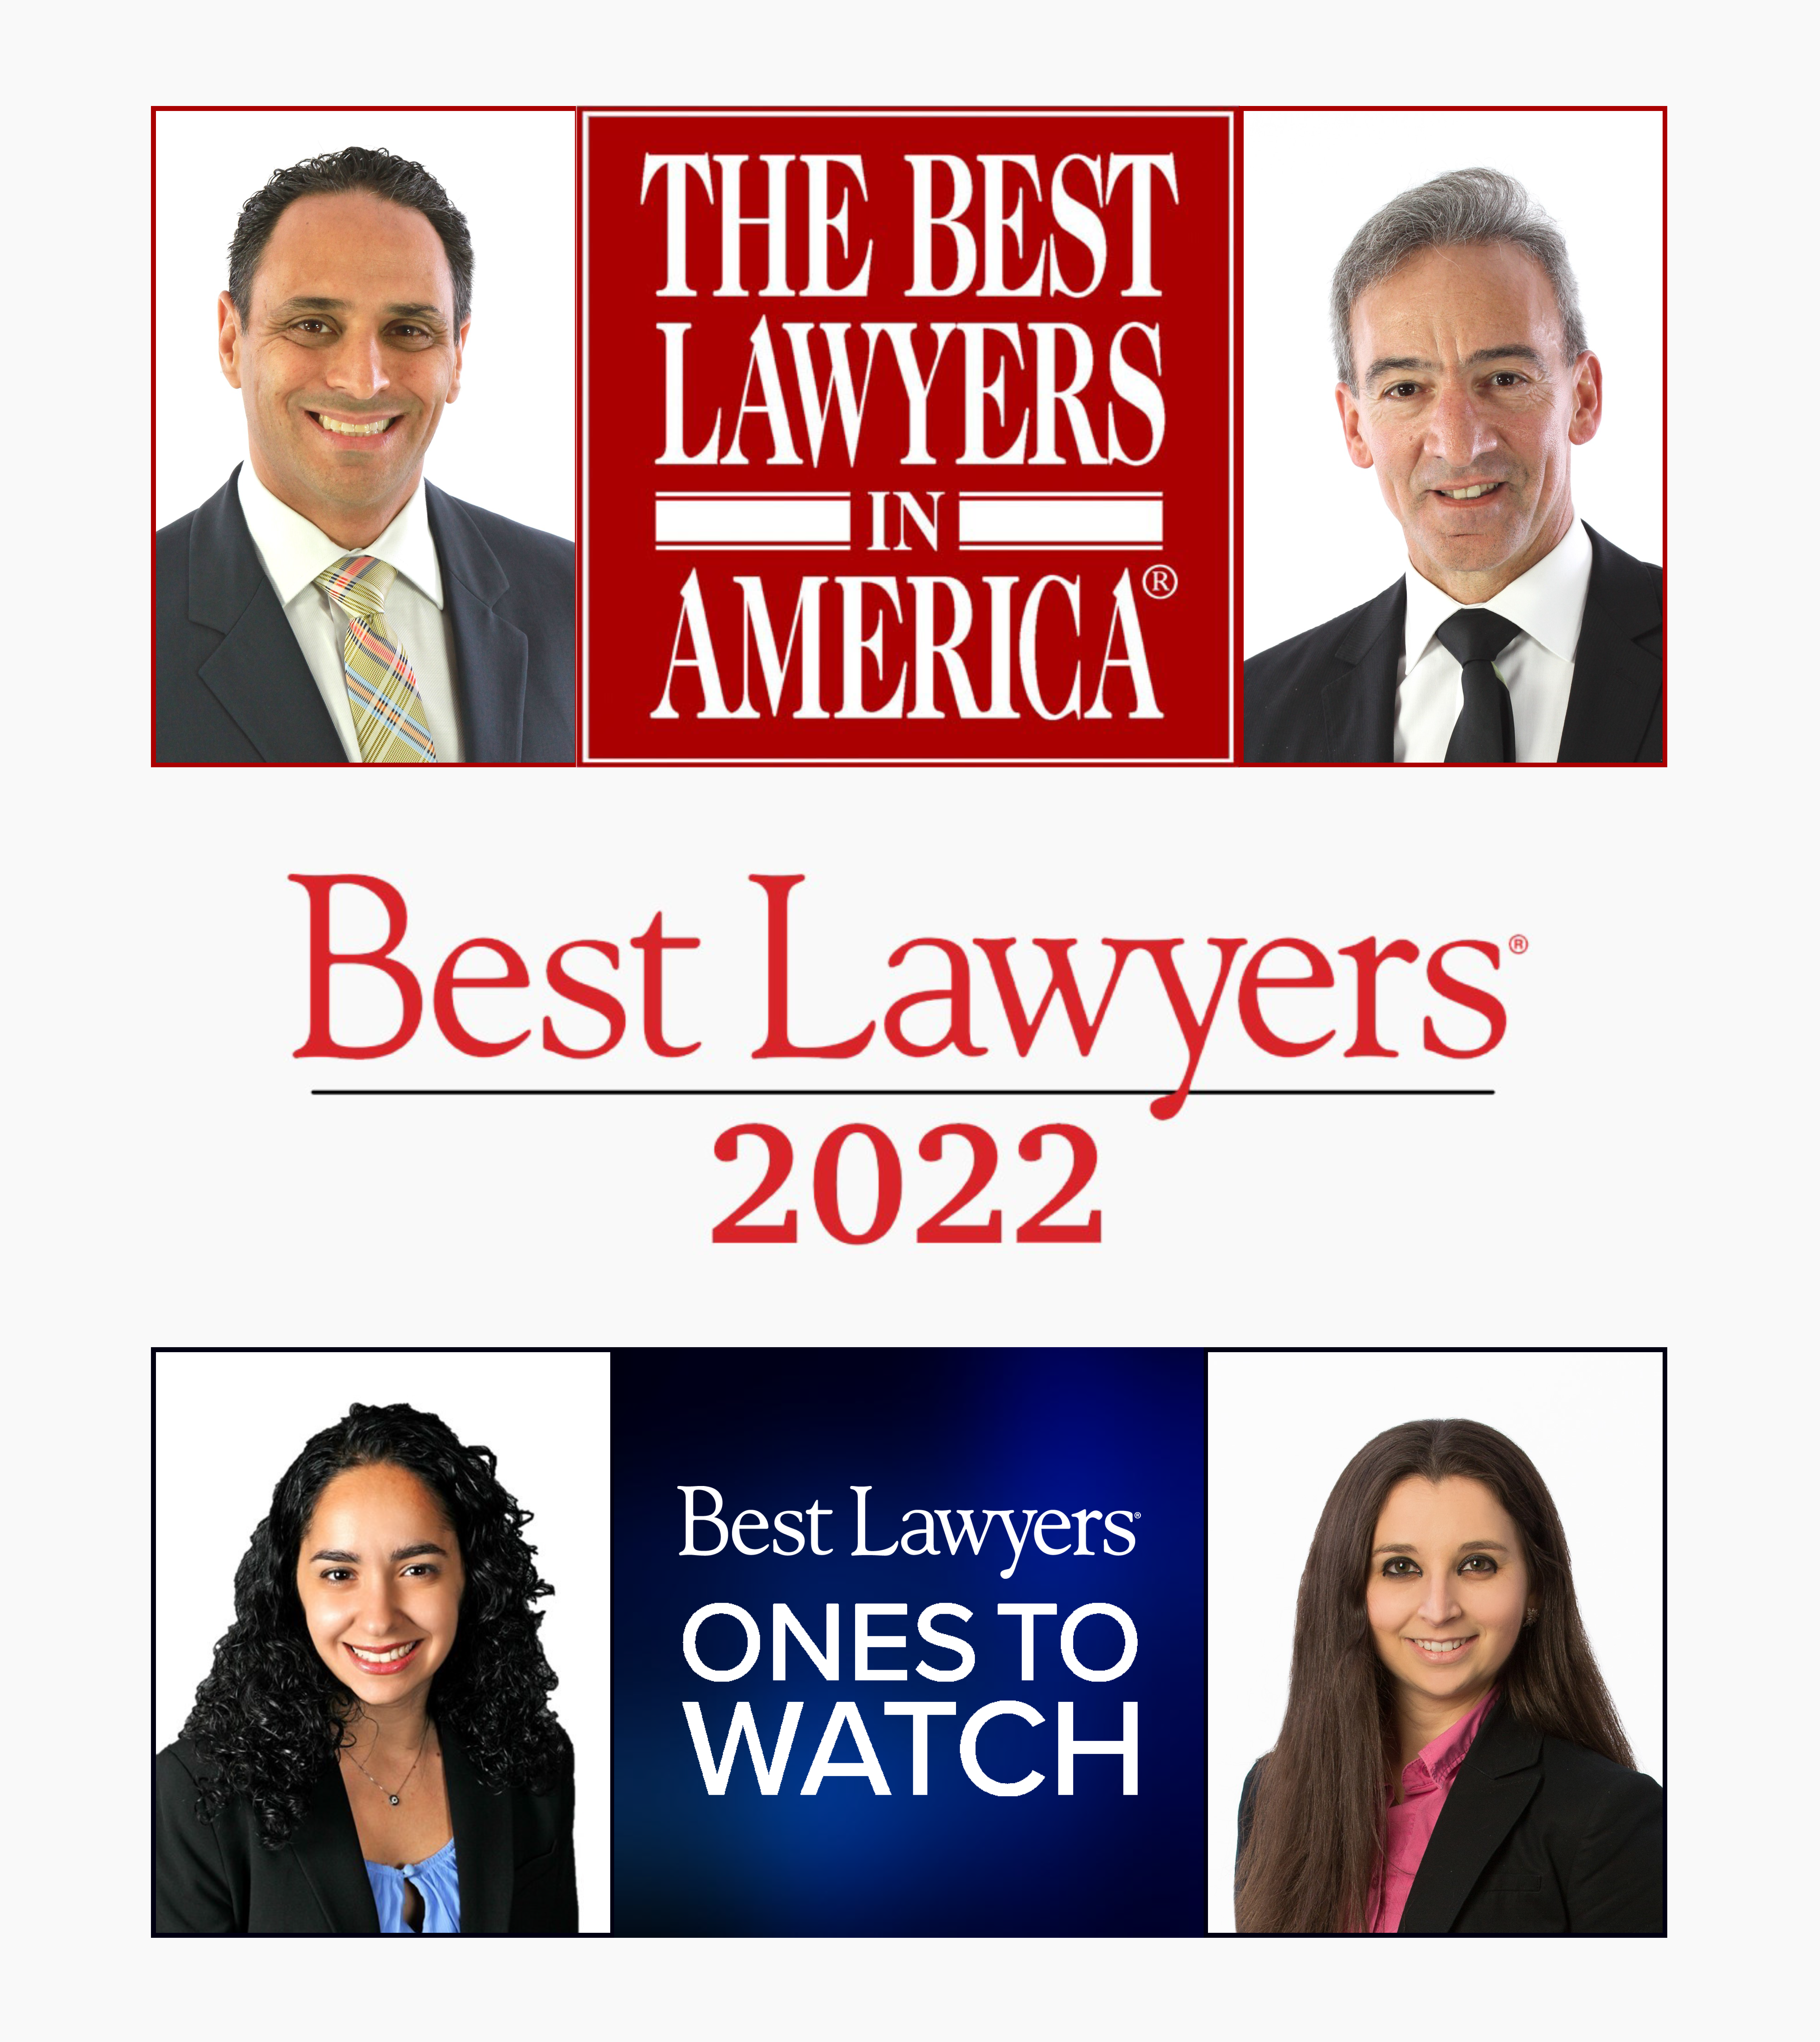 Best Lawyers 2022 and Lawyers to Watch